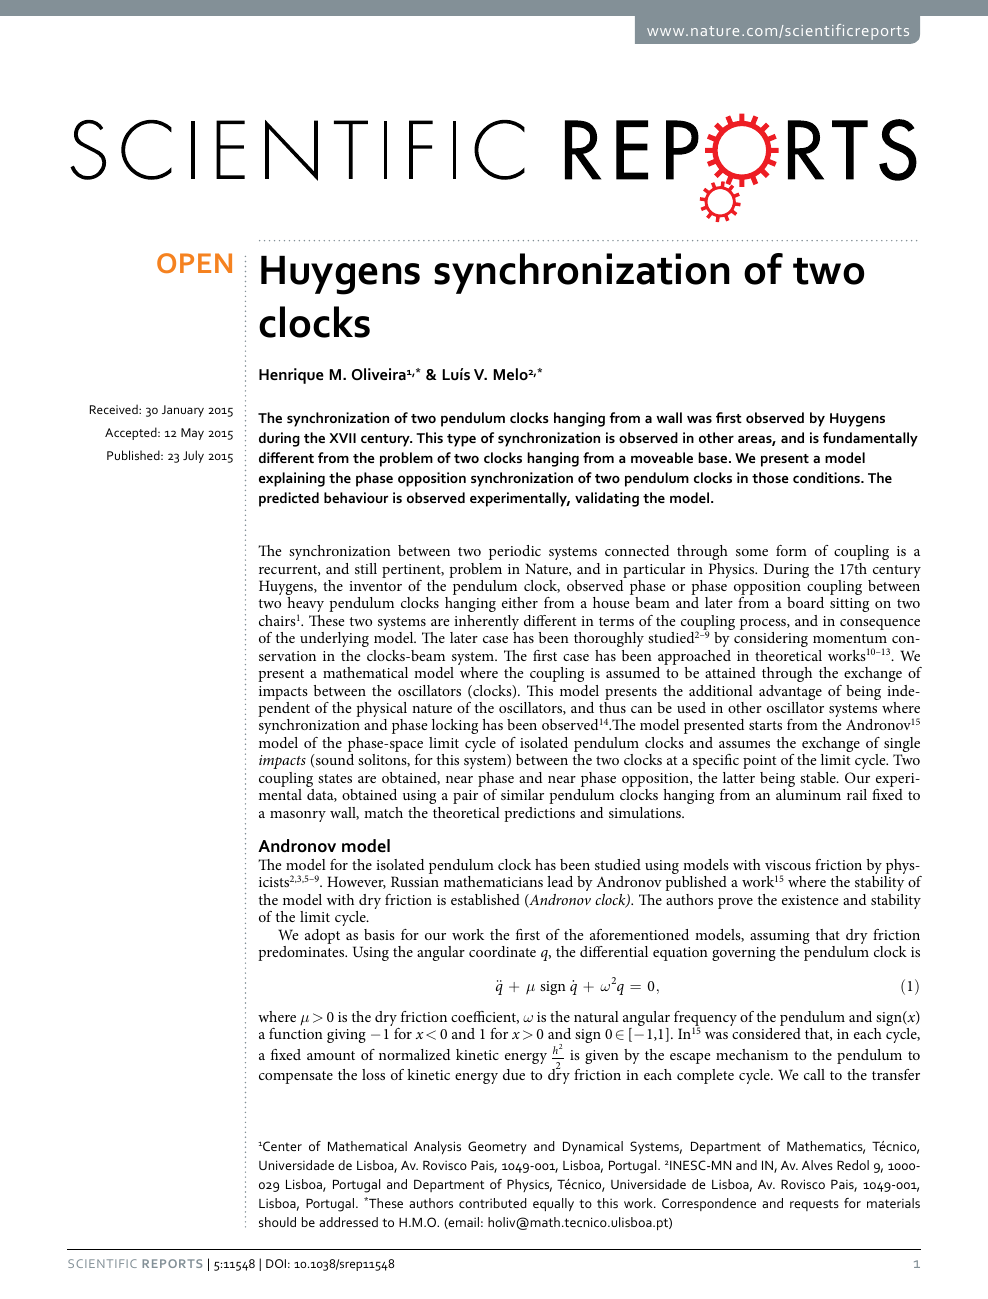 Huygens synchronization of two clocks – topic of paper in Mathematics. Download scholarly article PDF and read for free on CyberLeninka open science hub.